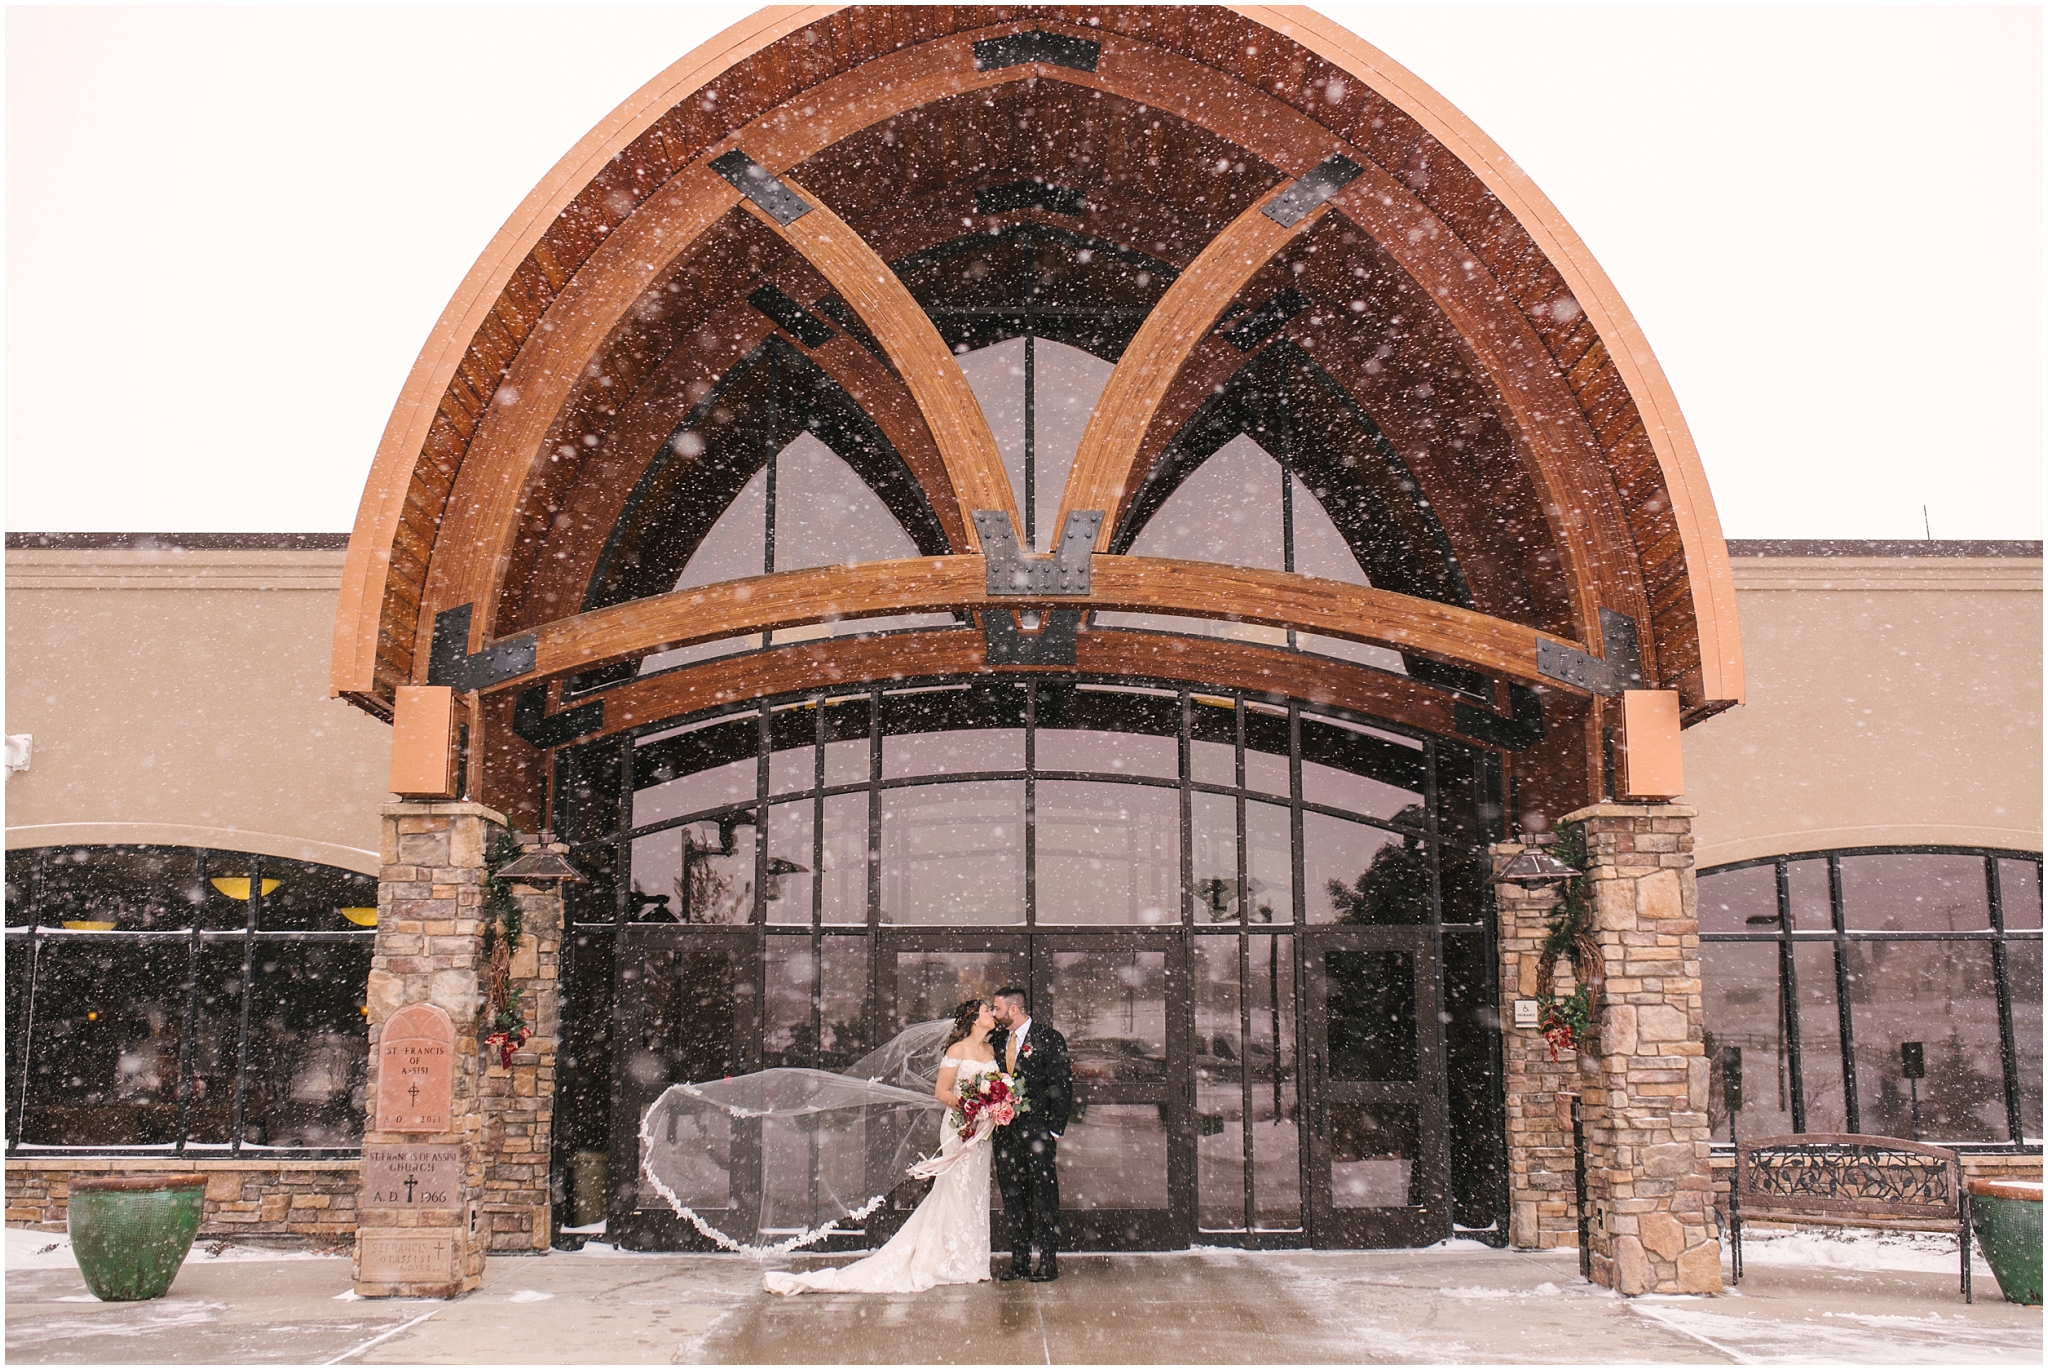 Bride and groom kissing as bride's veil blows behind her in the snow outside St Francis of Assisi Catholic Church